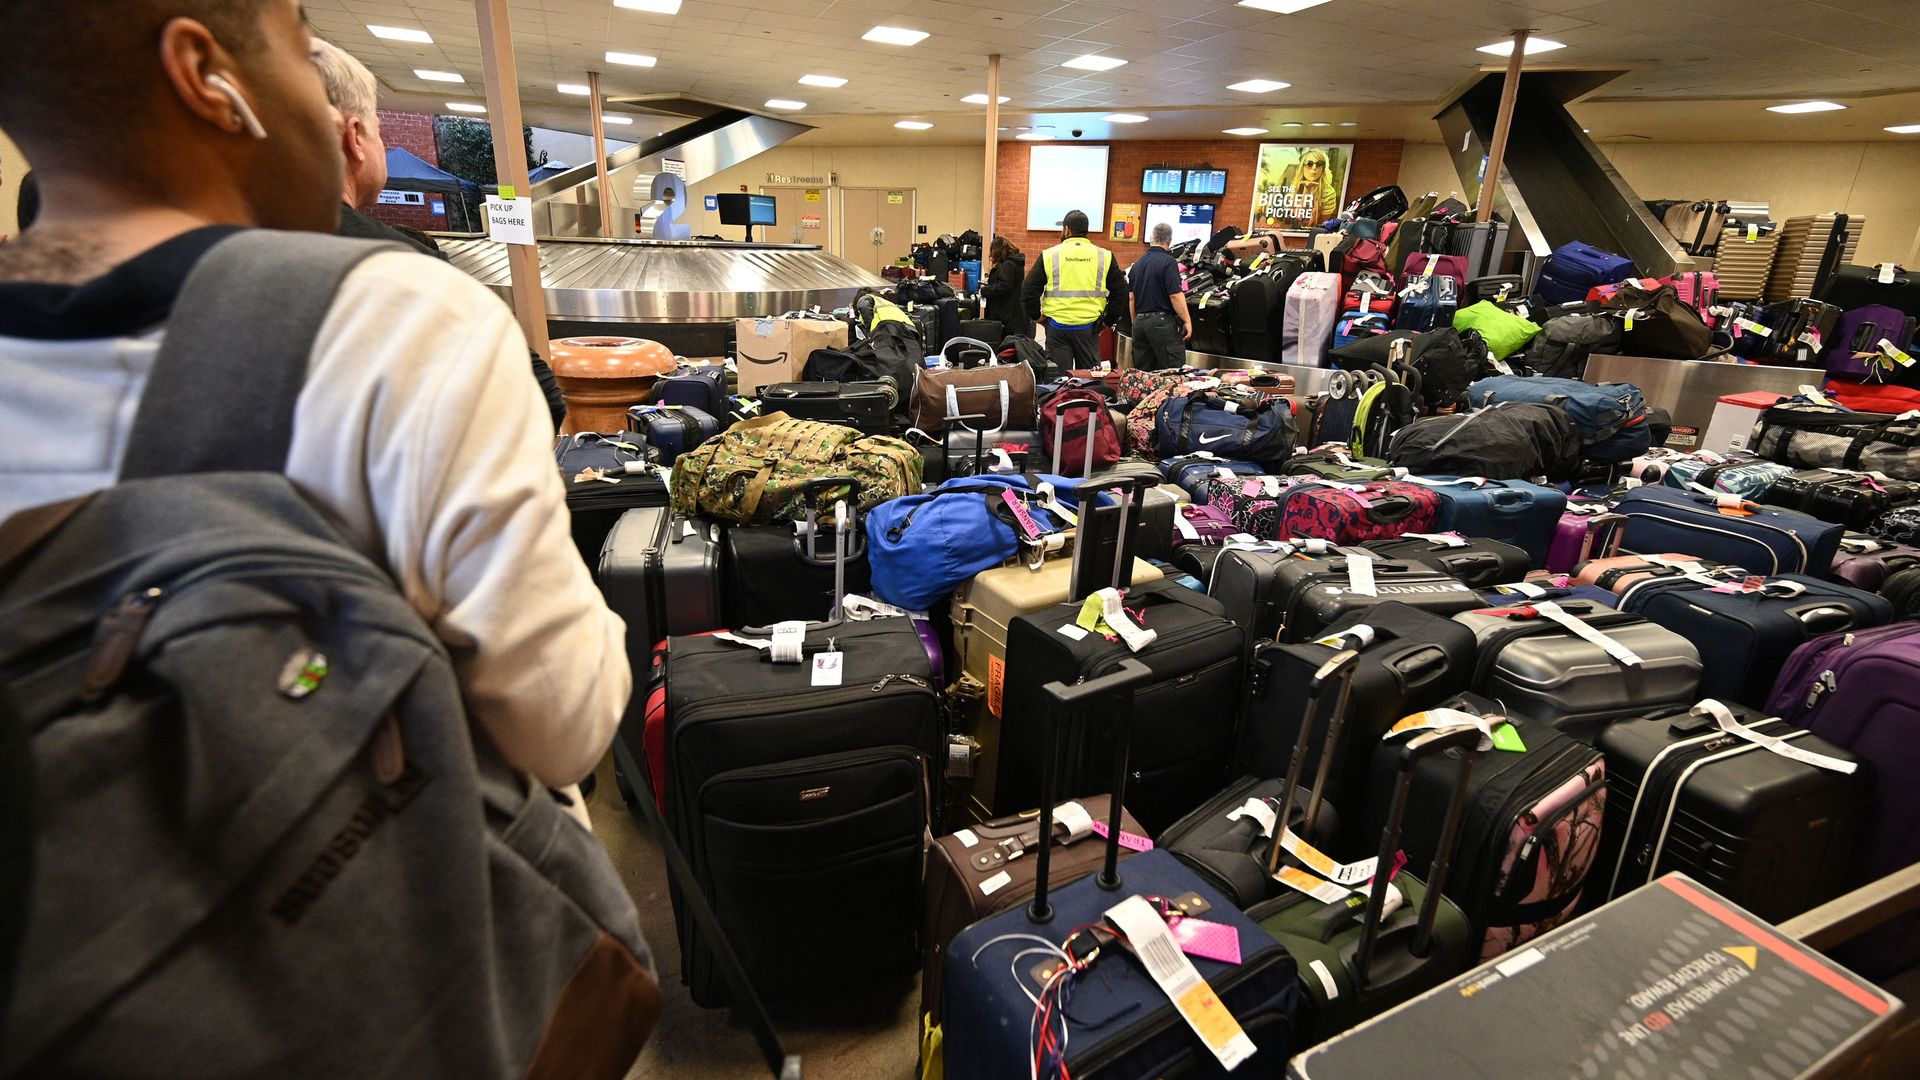 Newly arrived Southwest Airlines passengers wait for their luggage to arrive at Hollywood Burbank Airport in Burbank, California, on December 27, 2022